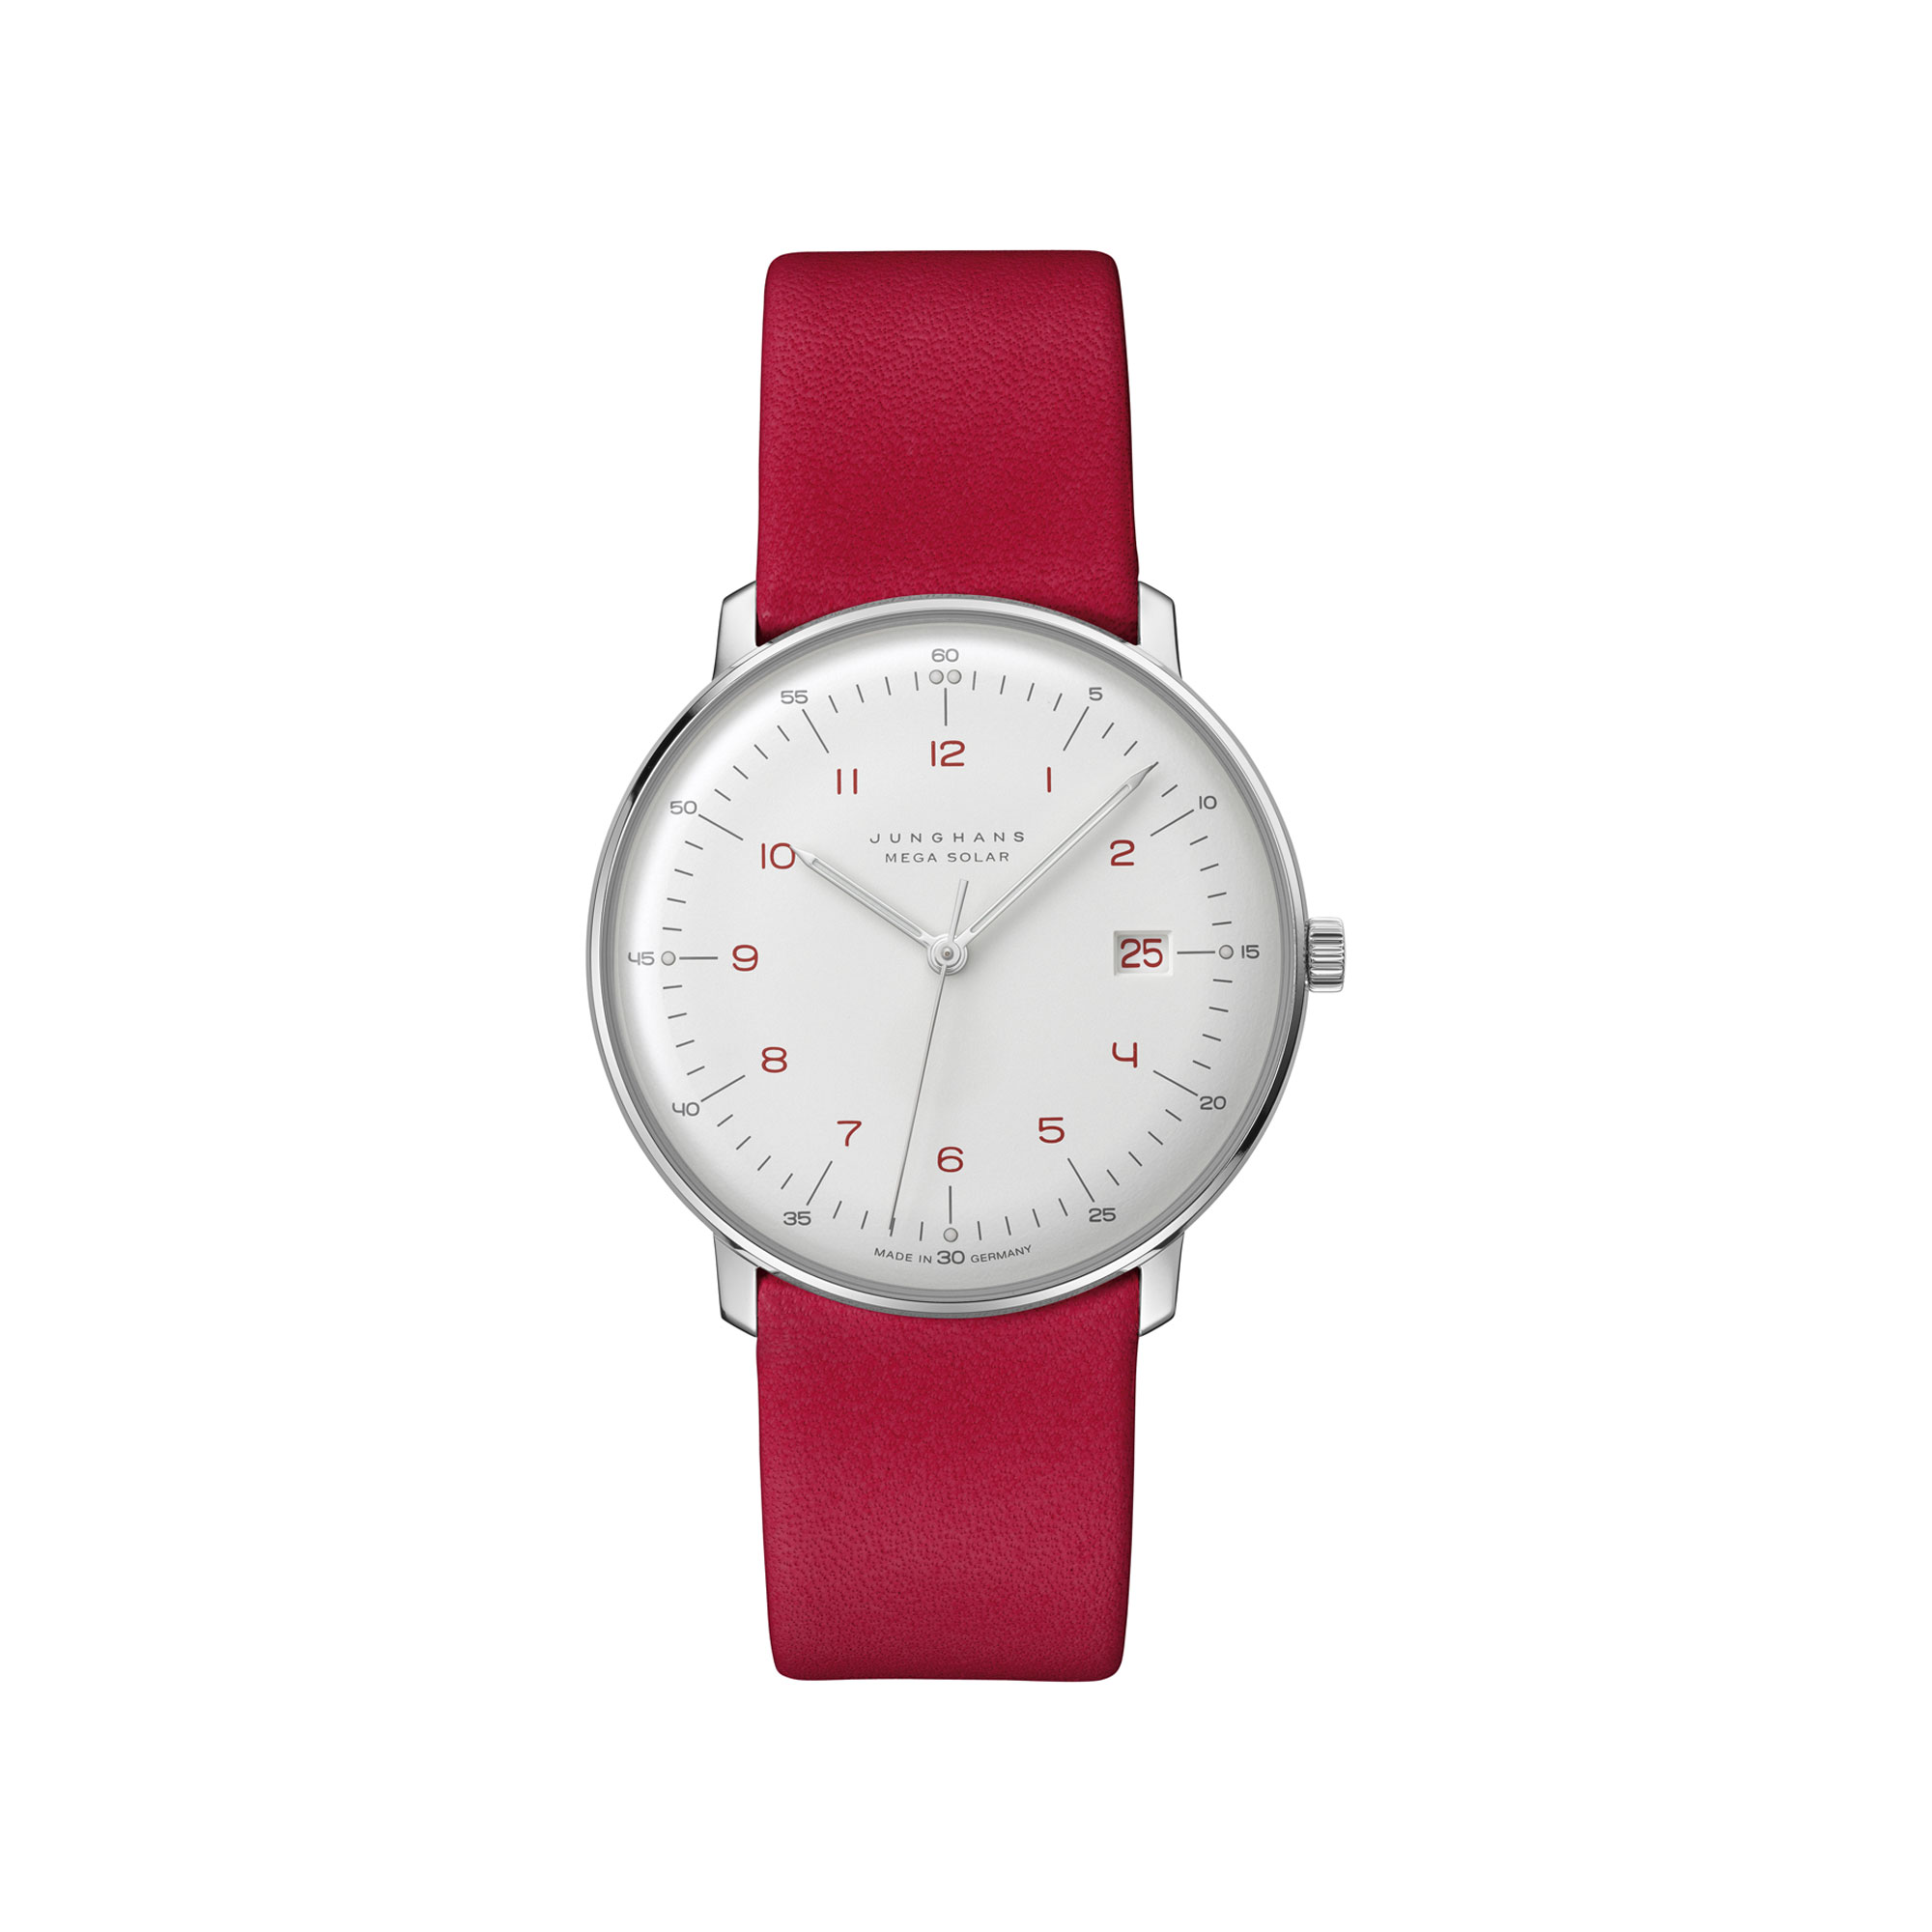 The Junghans Max Bill Solar Watch Collection - Gessato